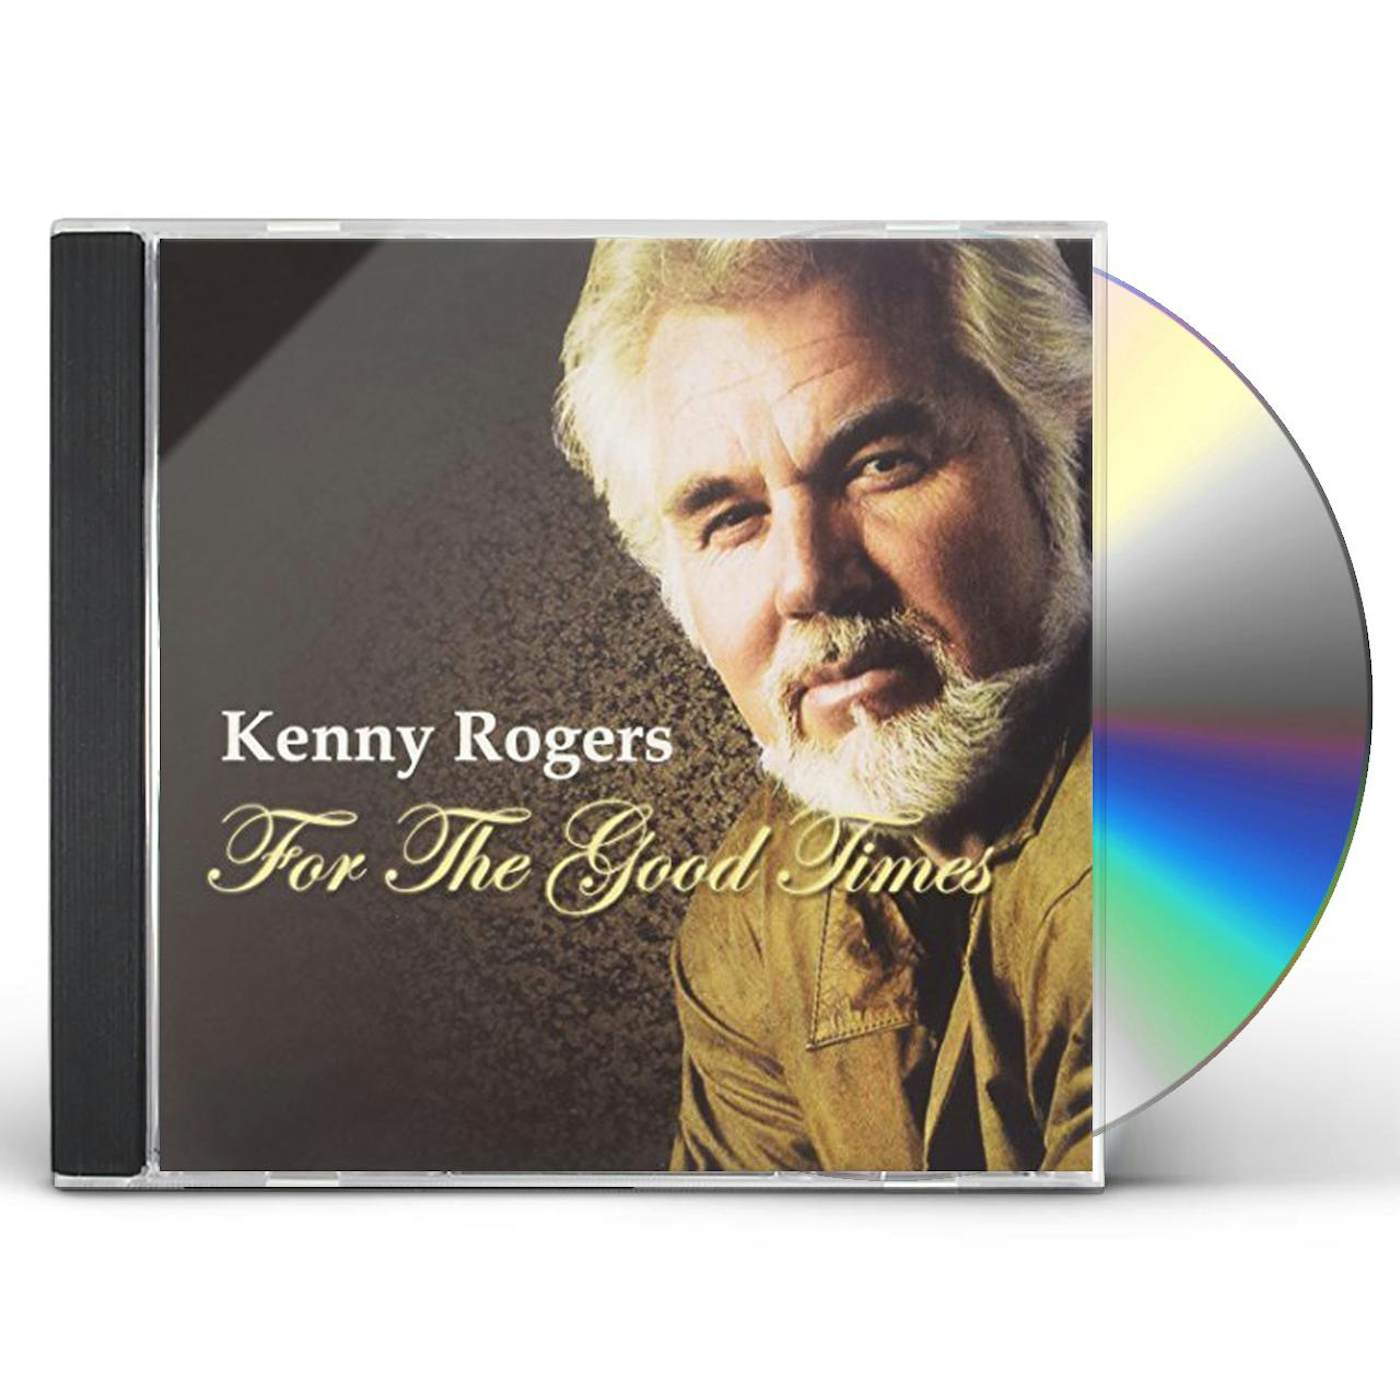 Kenny Rogers FOR THE GOOD TIMES CD